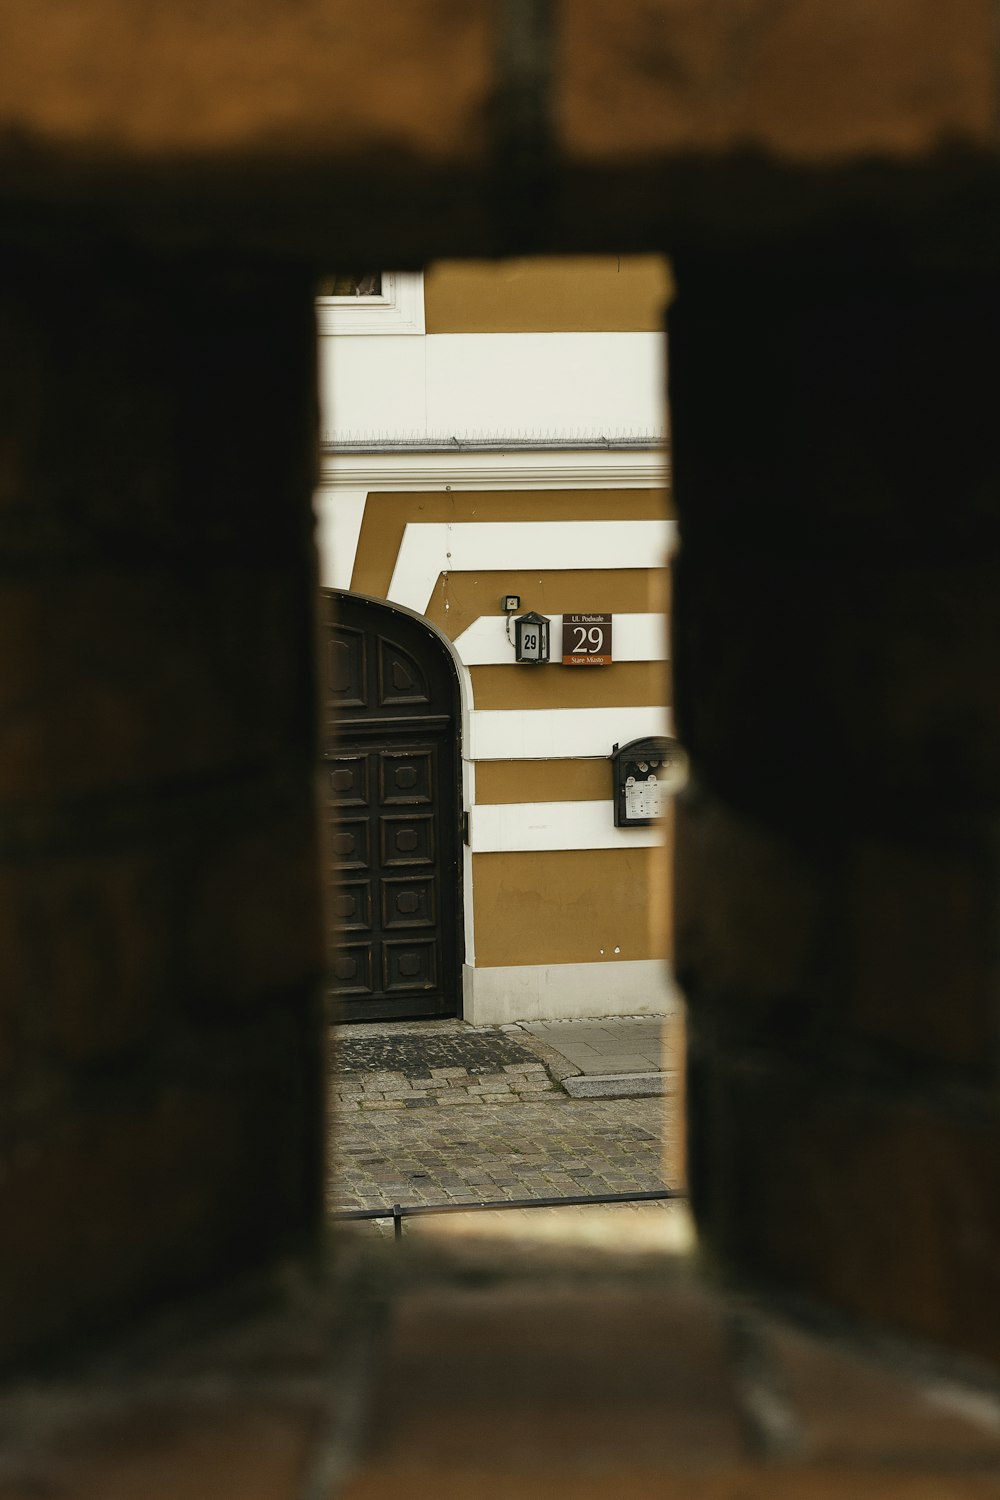 a view of a building through a hole in a brick wall